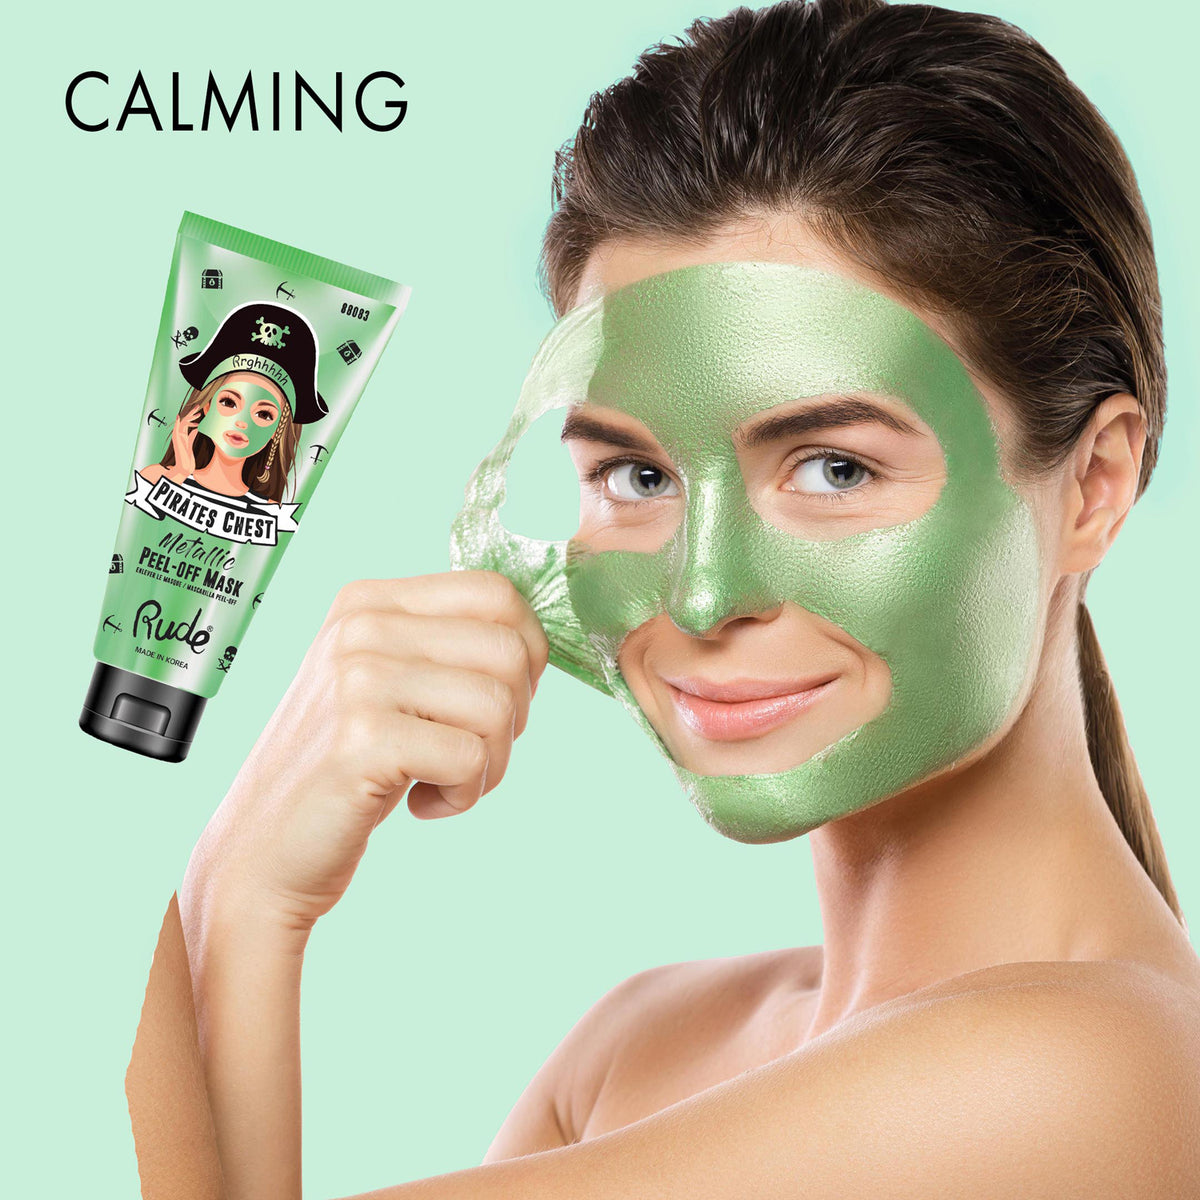 Pirate's Chest Metallic Peel Off Mask Calming Face